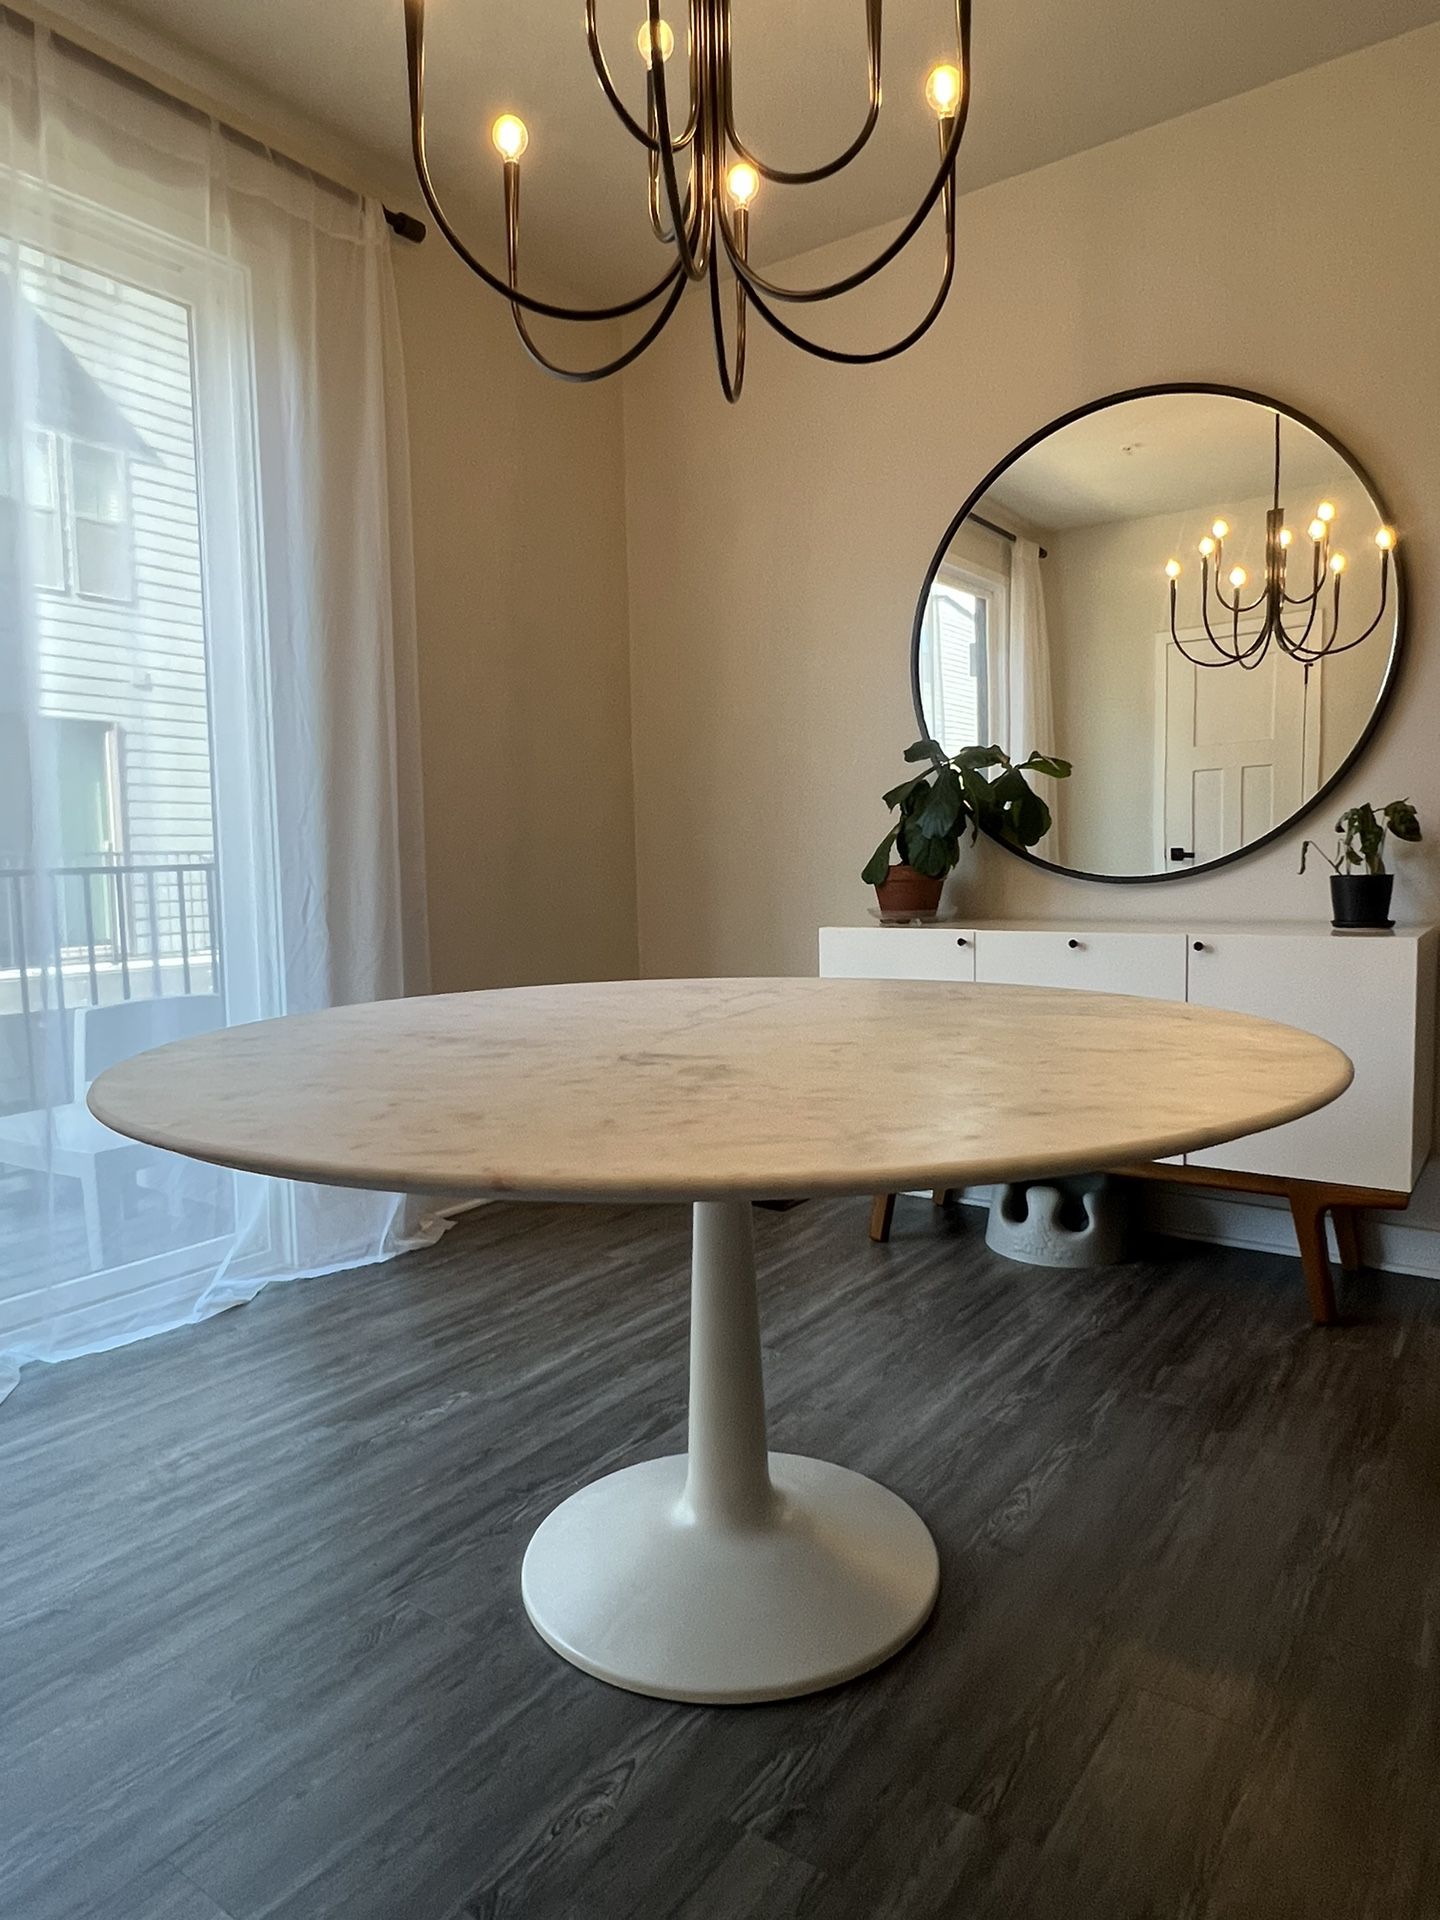 West Elm Marble Dining Table 60”